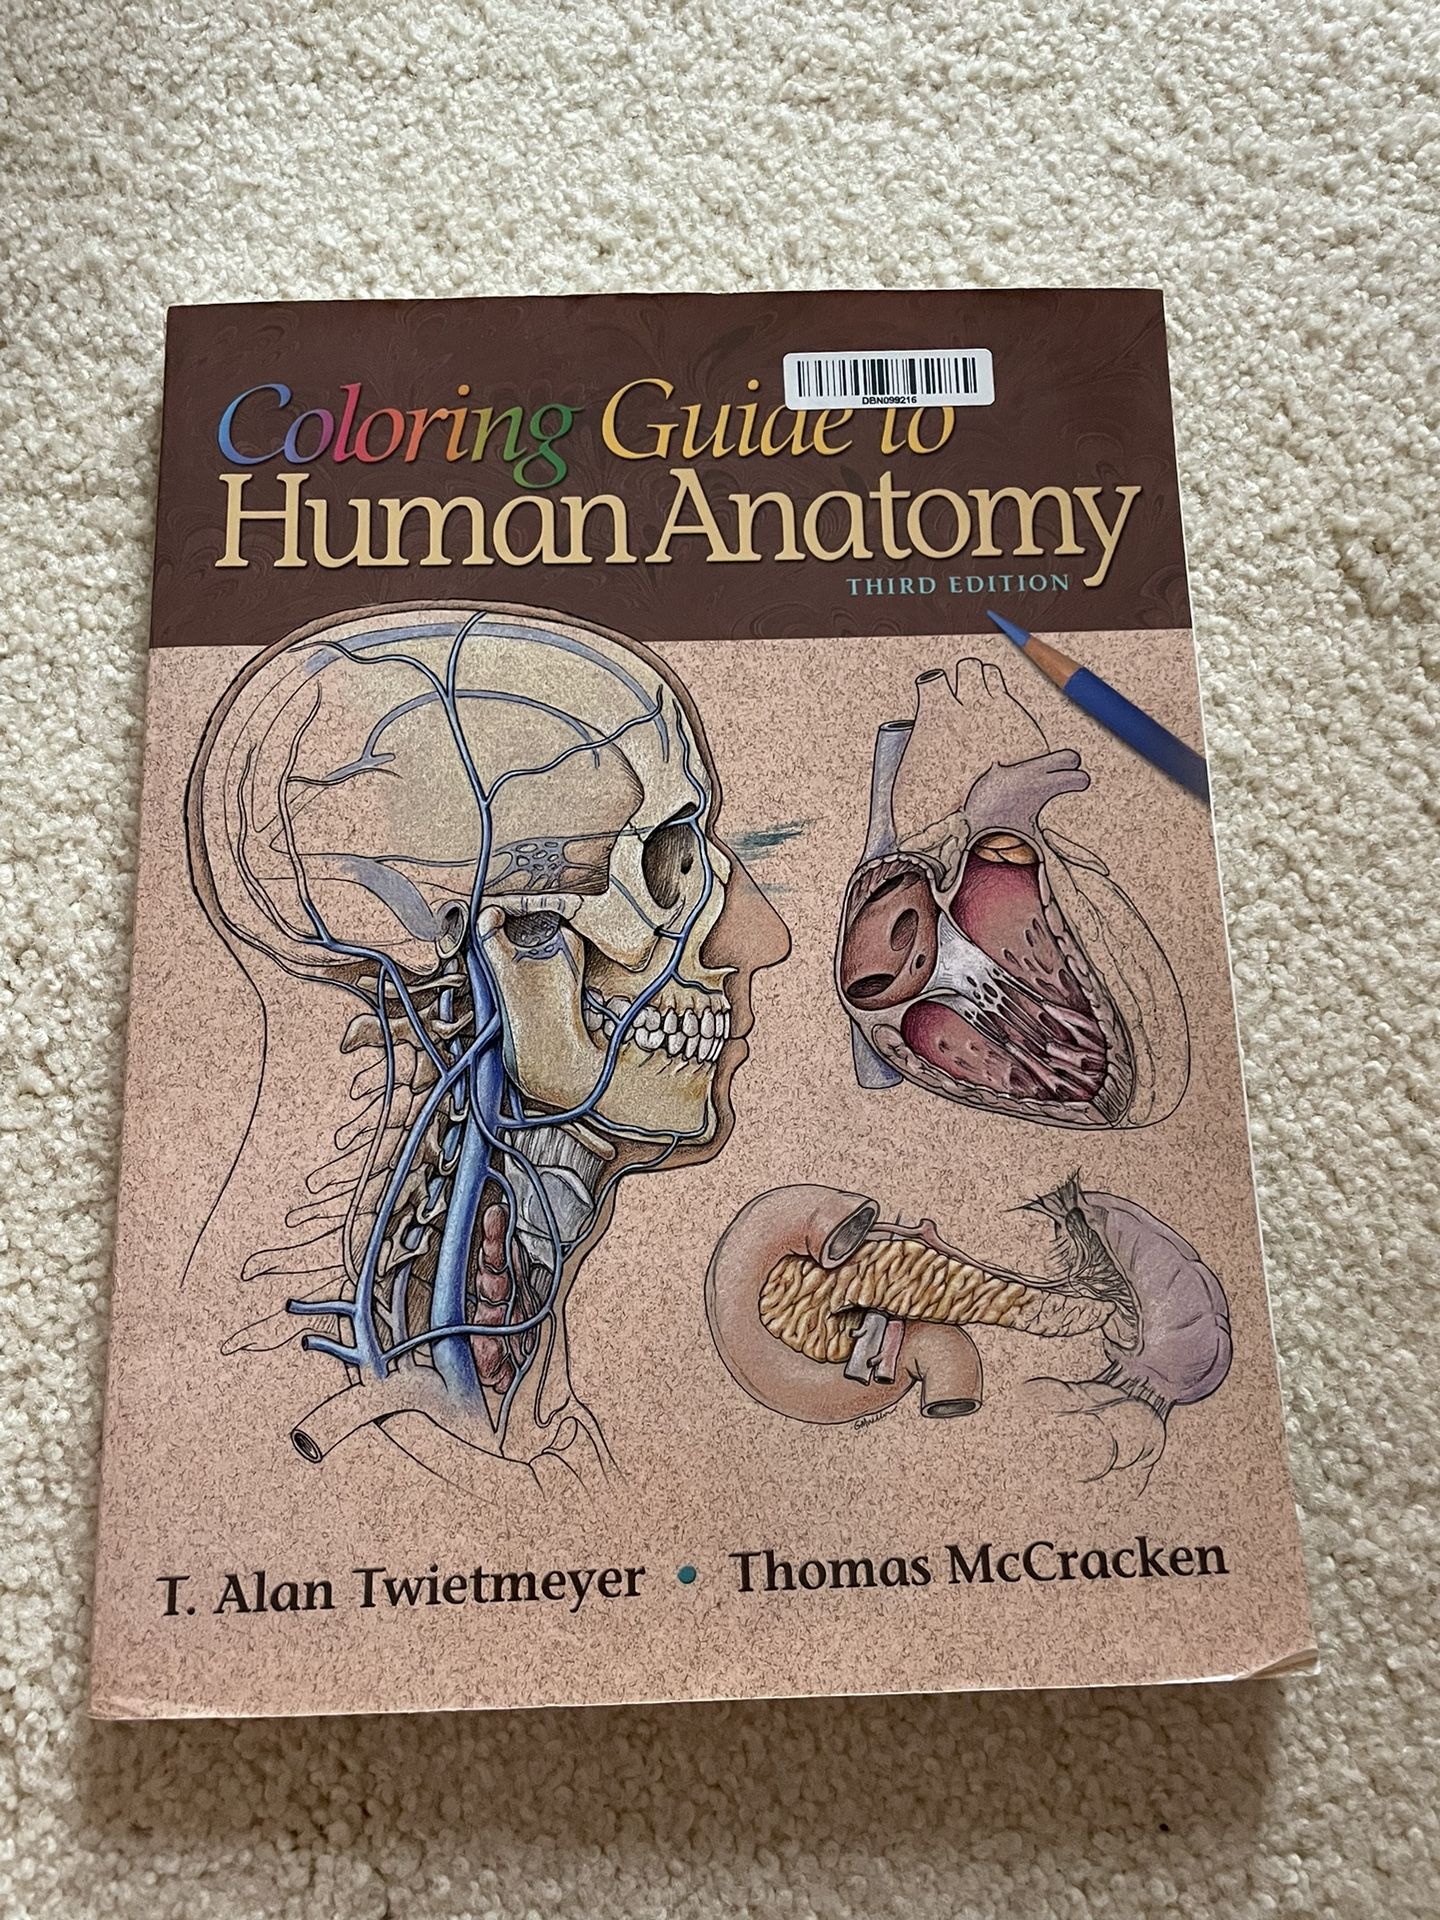 Coloring Guide to Human Anatomy by Thomas O. McCracken and T. Alan T